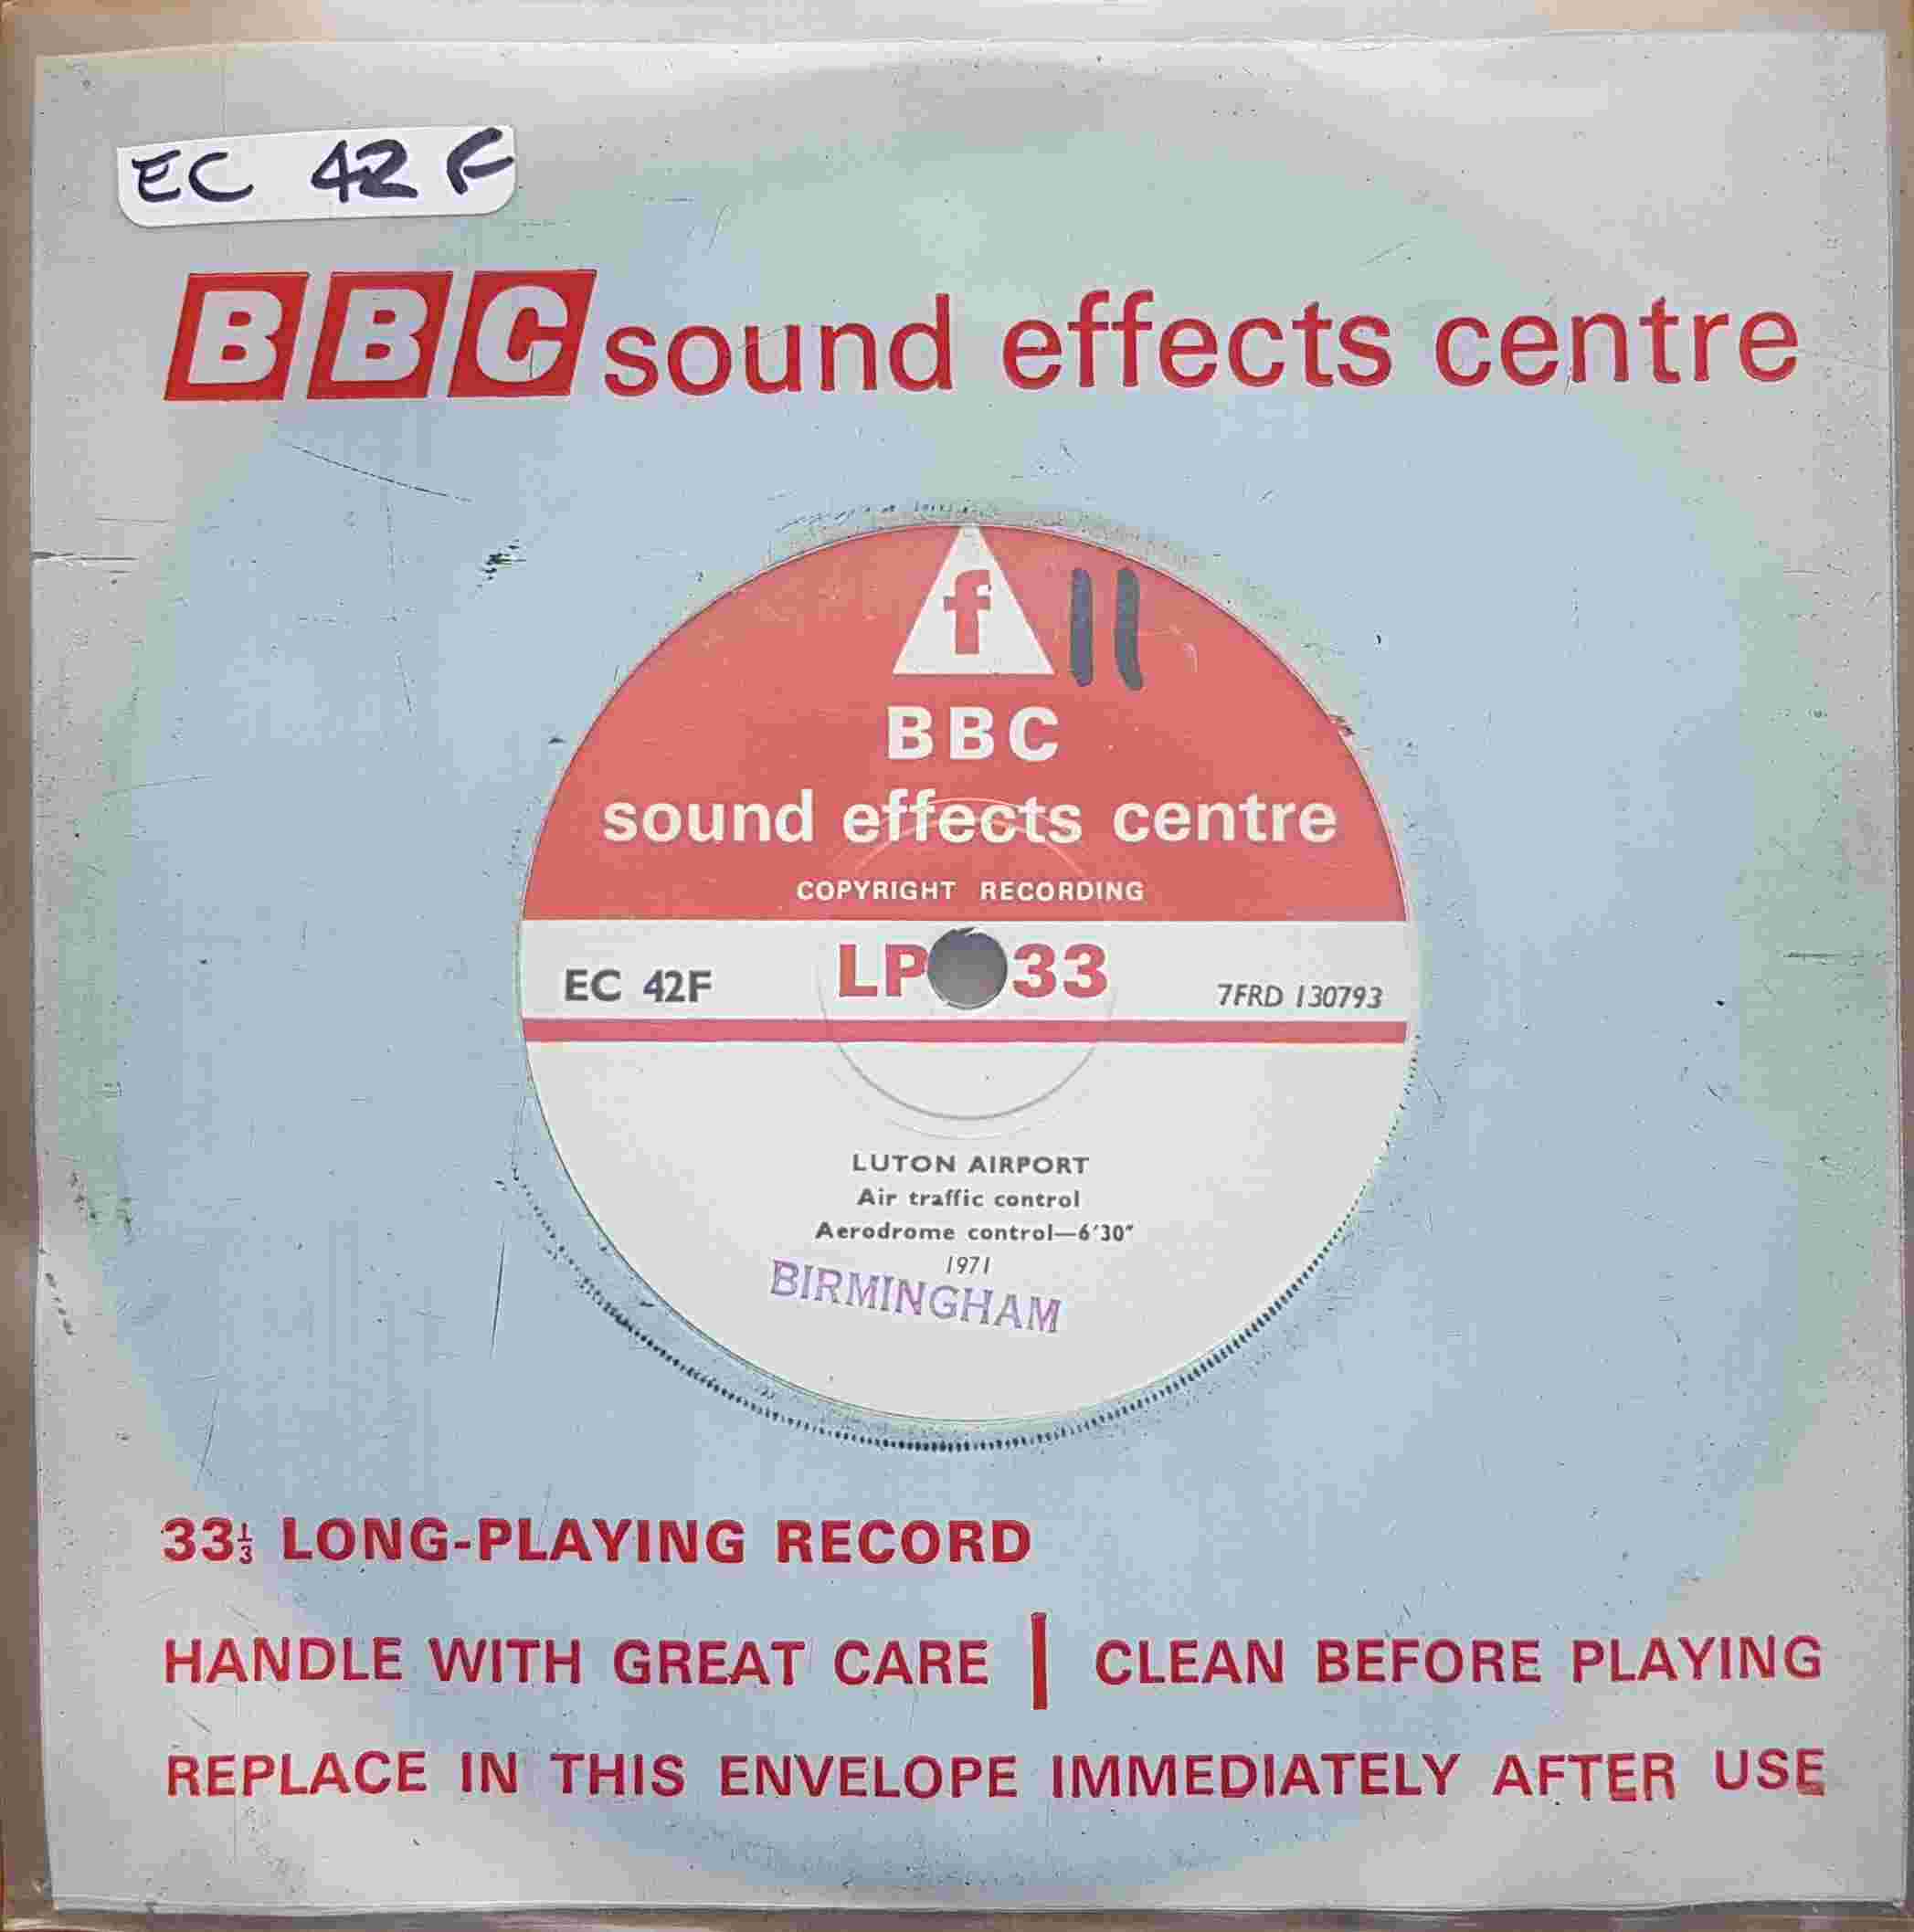 Picture of EC 42F Luton airport - Air traffic control 1971 by artist Not registered from the BBC singles - Records and Tapes library